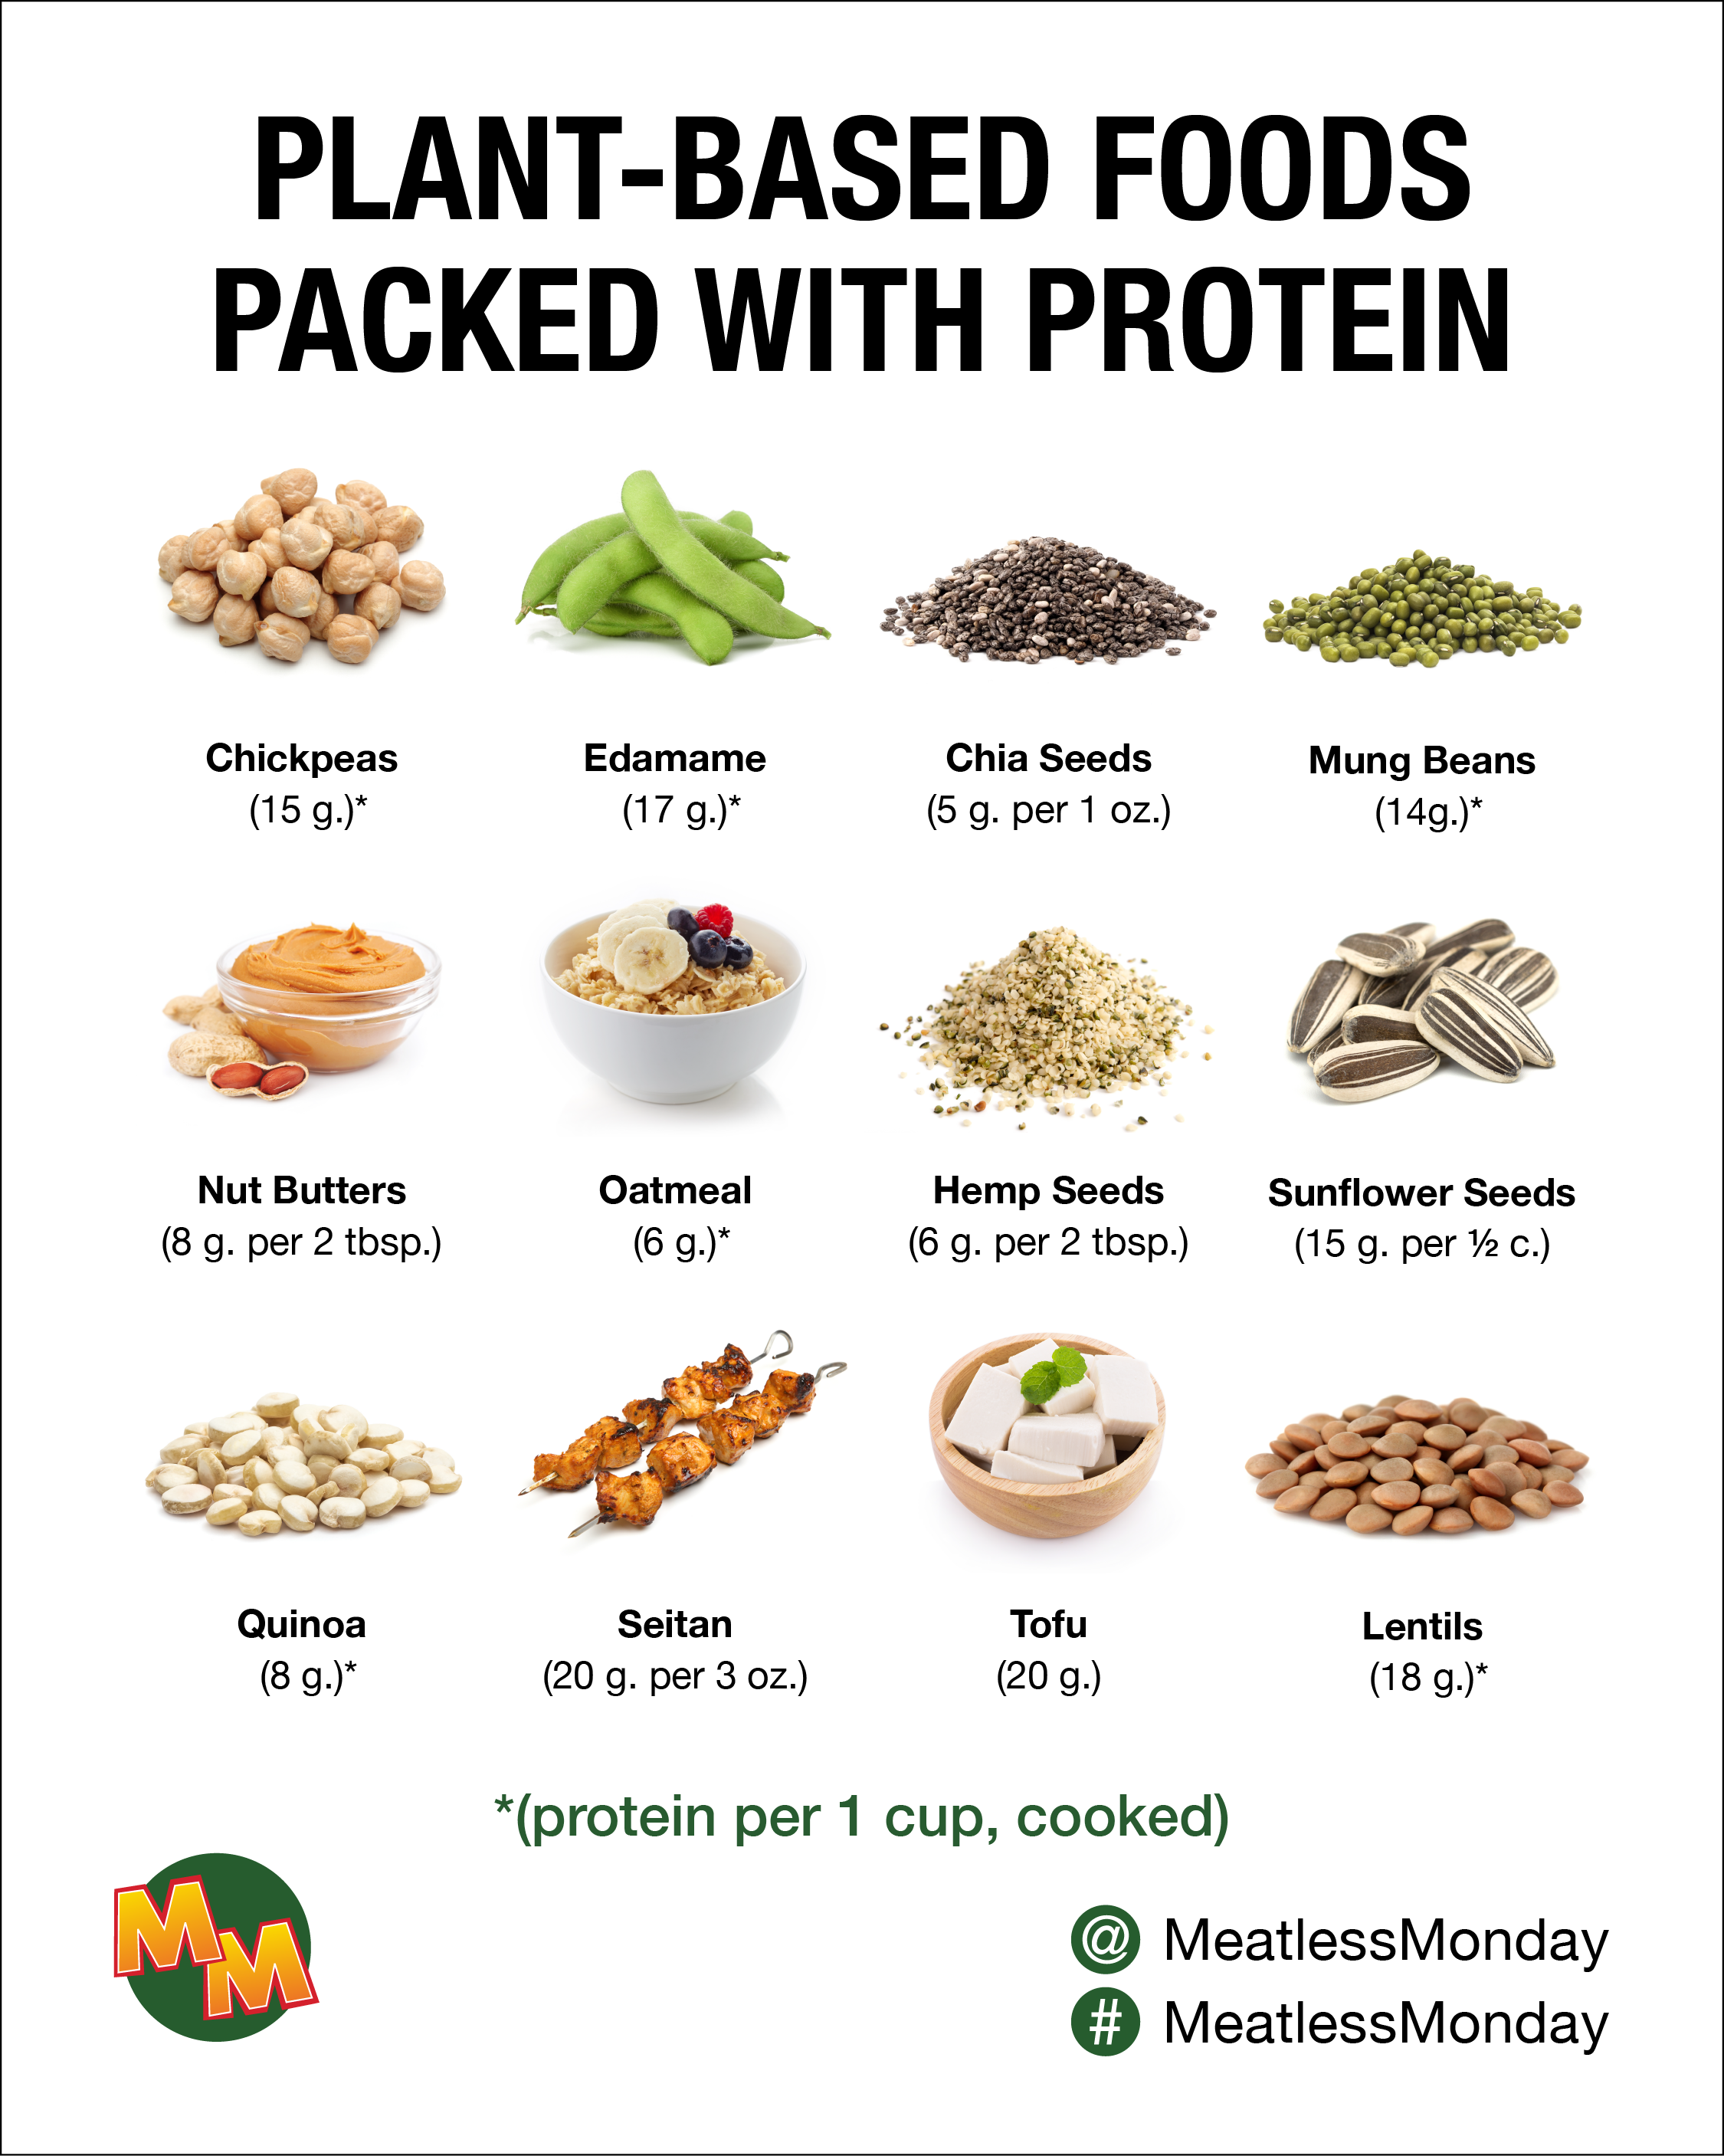 Top 20 Plant-Based Proteins - Meatless Monday